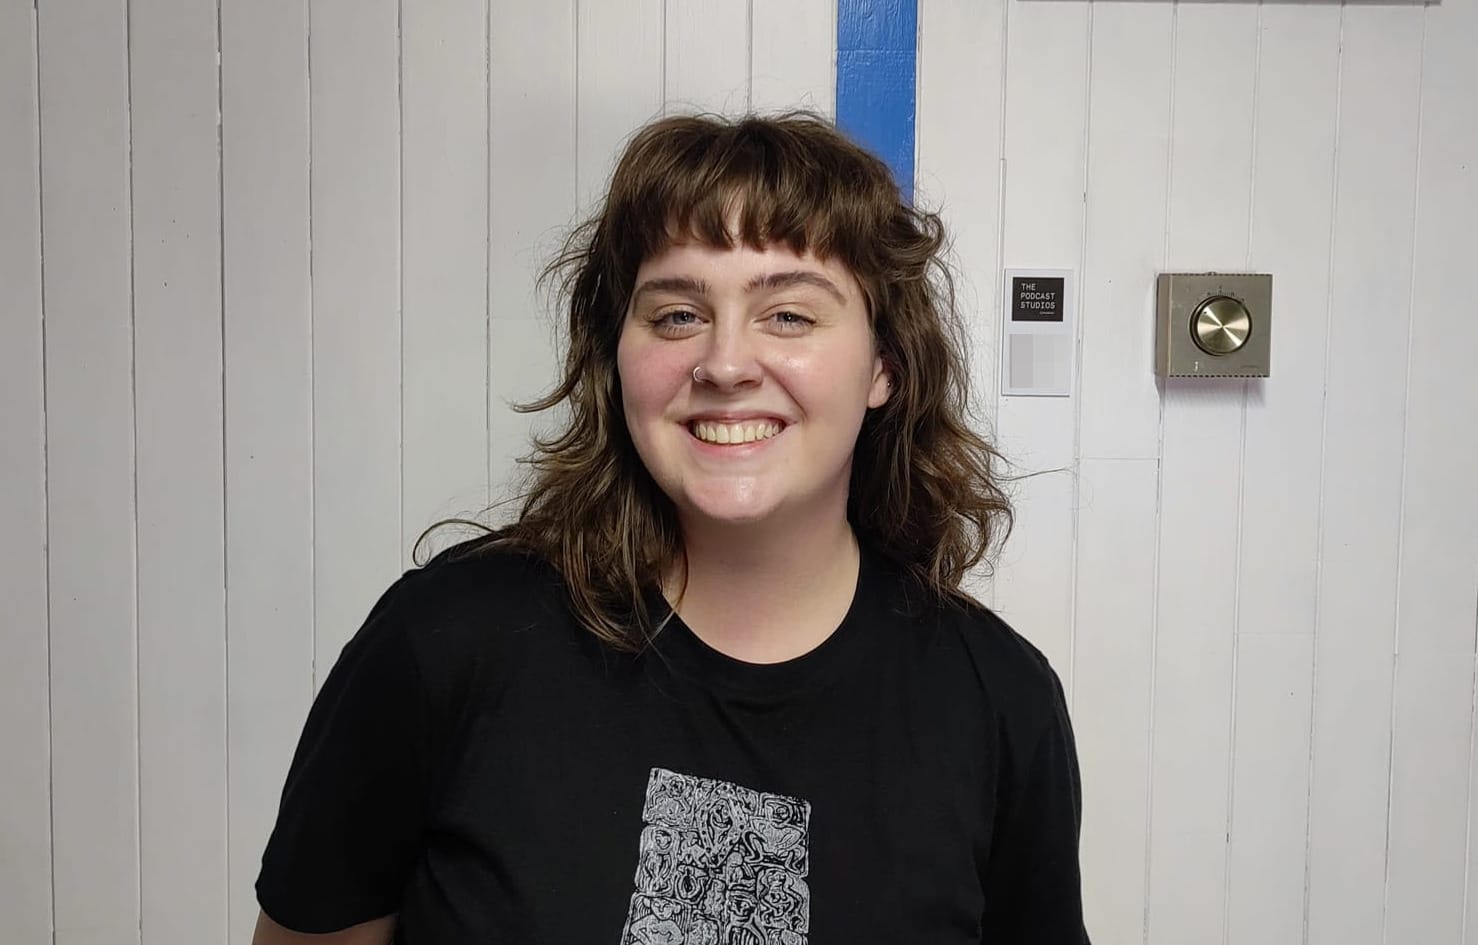 Megan Nyhan, a young woman in a black T-shirt, pictured in the The Podcast Studios.